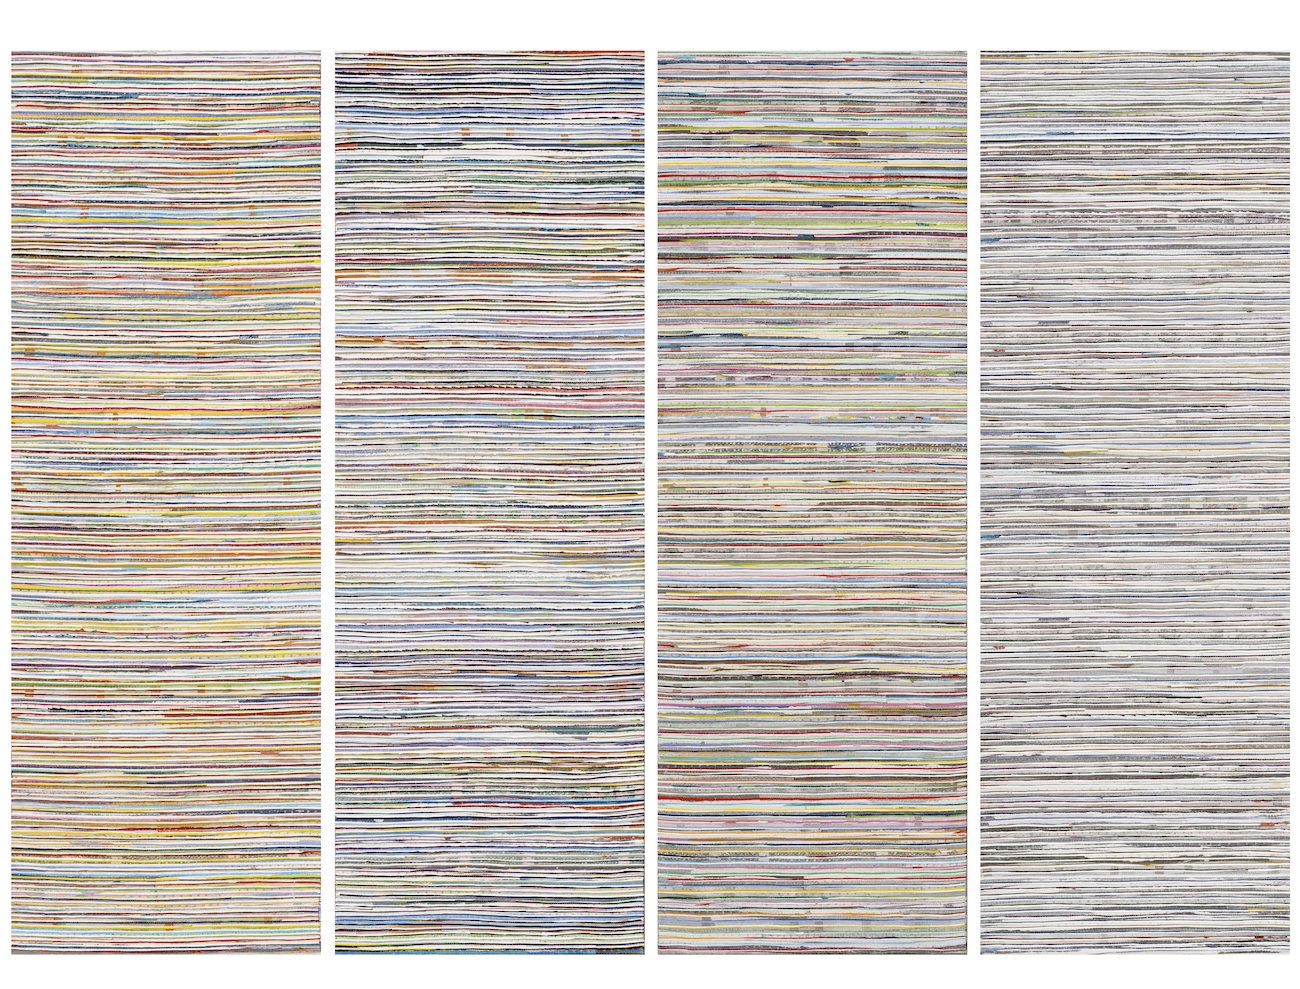 Middle Ground - In the Line 2014, acrylic and nylon thread on linen, 50 x 200cm (4 panels). Collection of the Artist